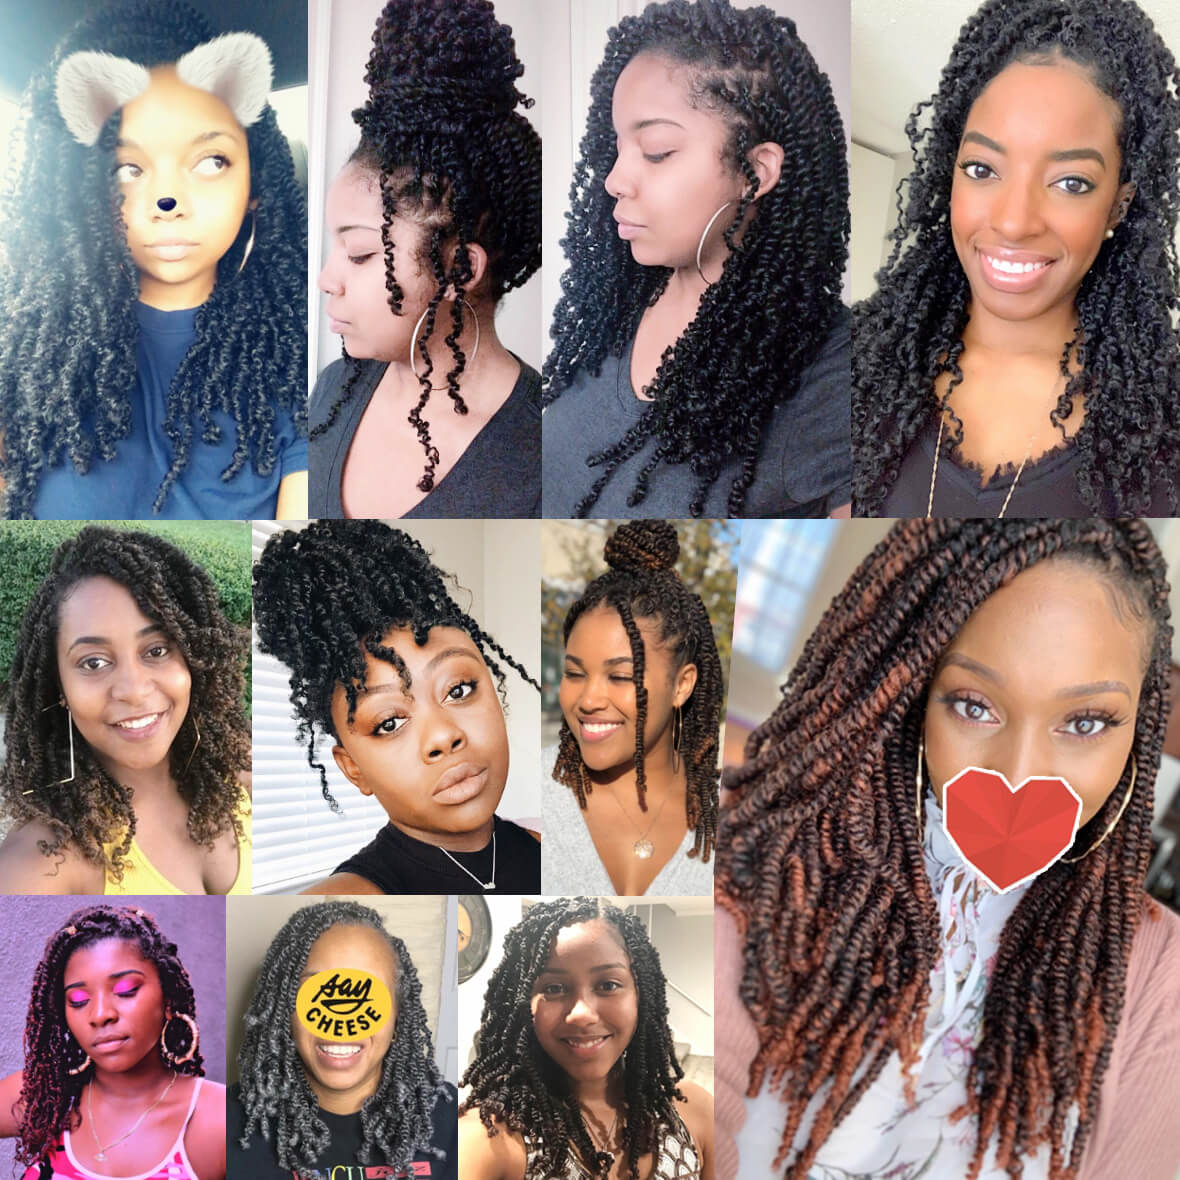 8 inch Spring Twist Hair 15 Strands/Pack Ombre Spring Twist Crochet Hair Curly Twist for Women